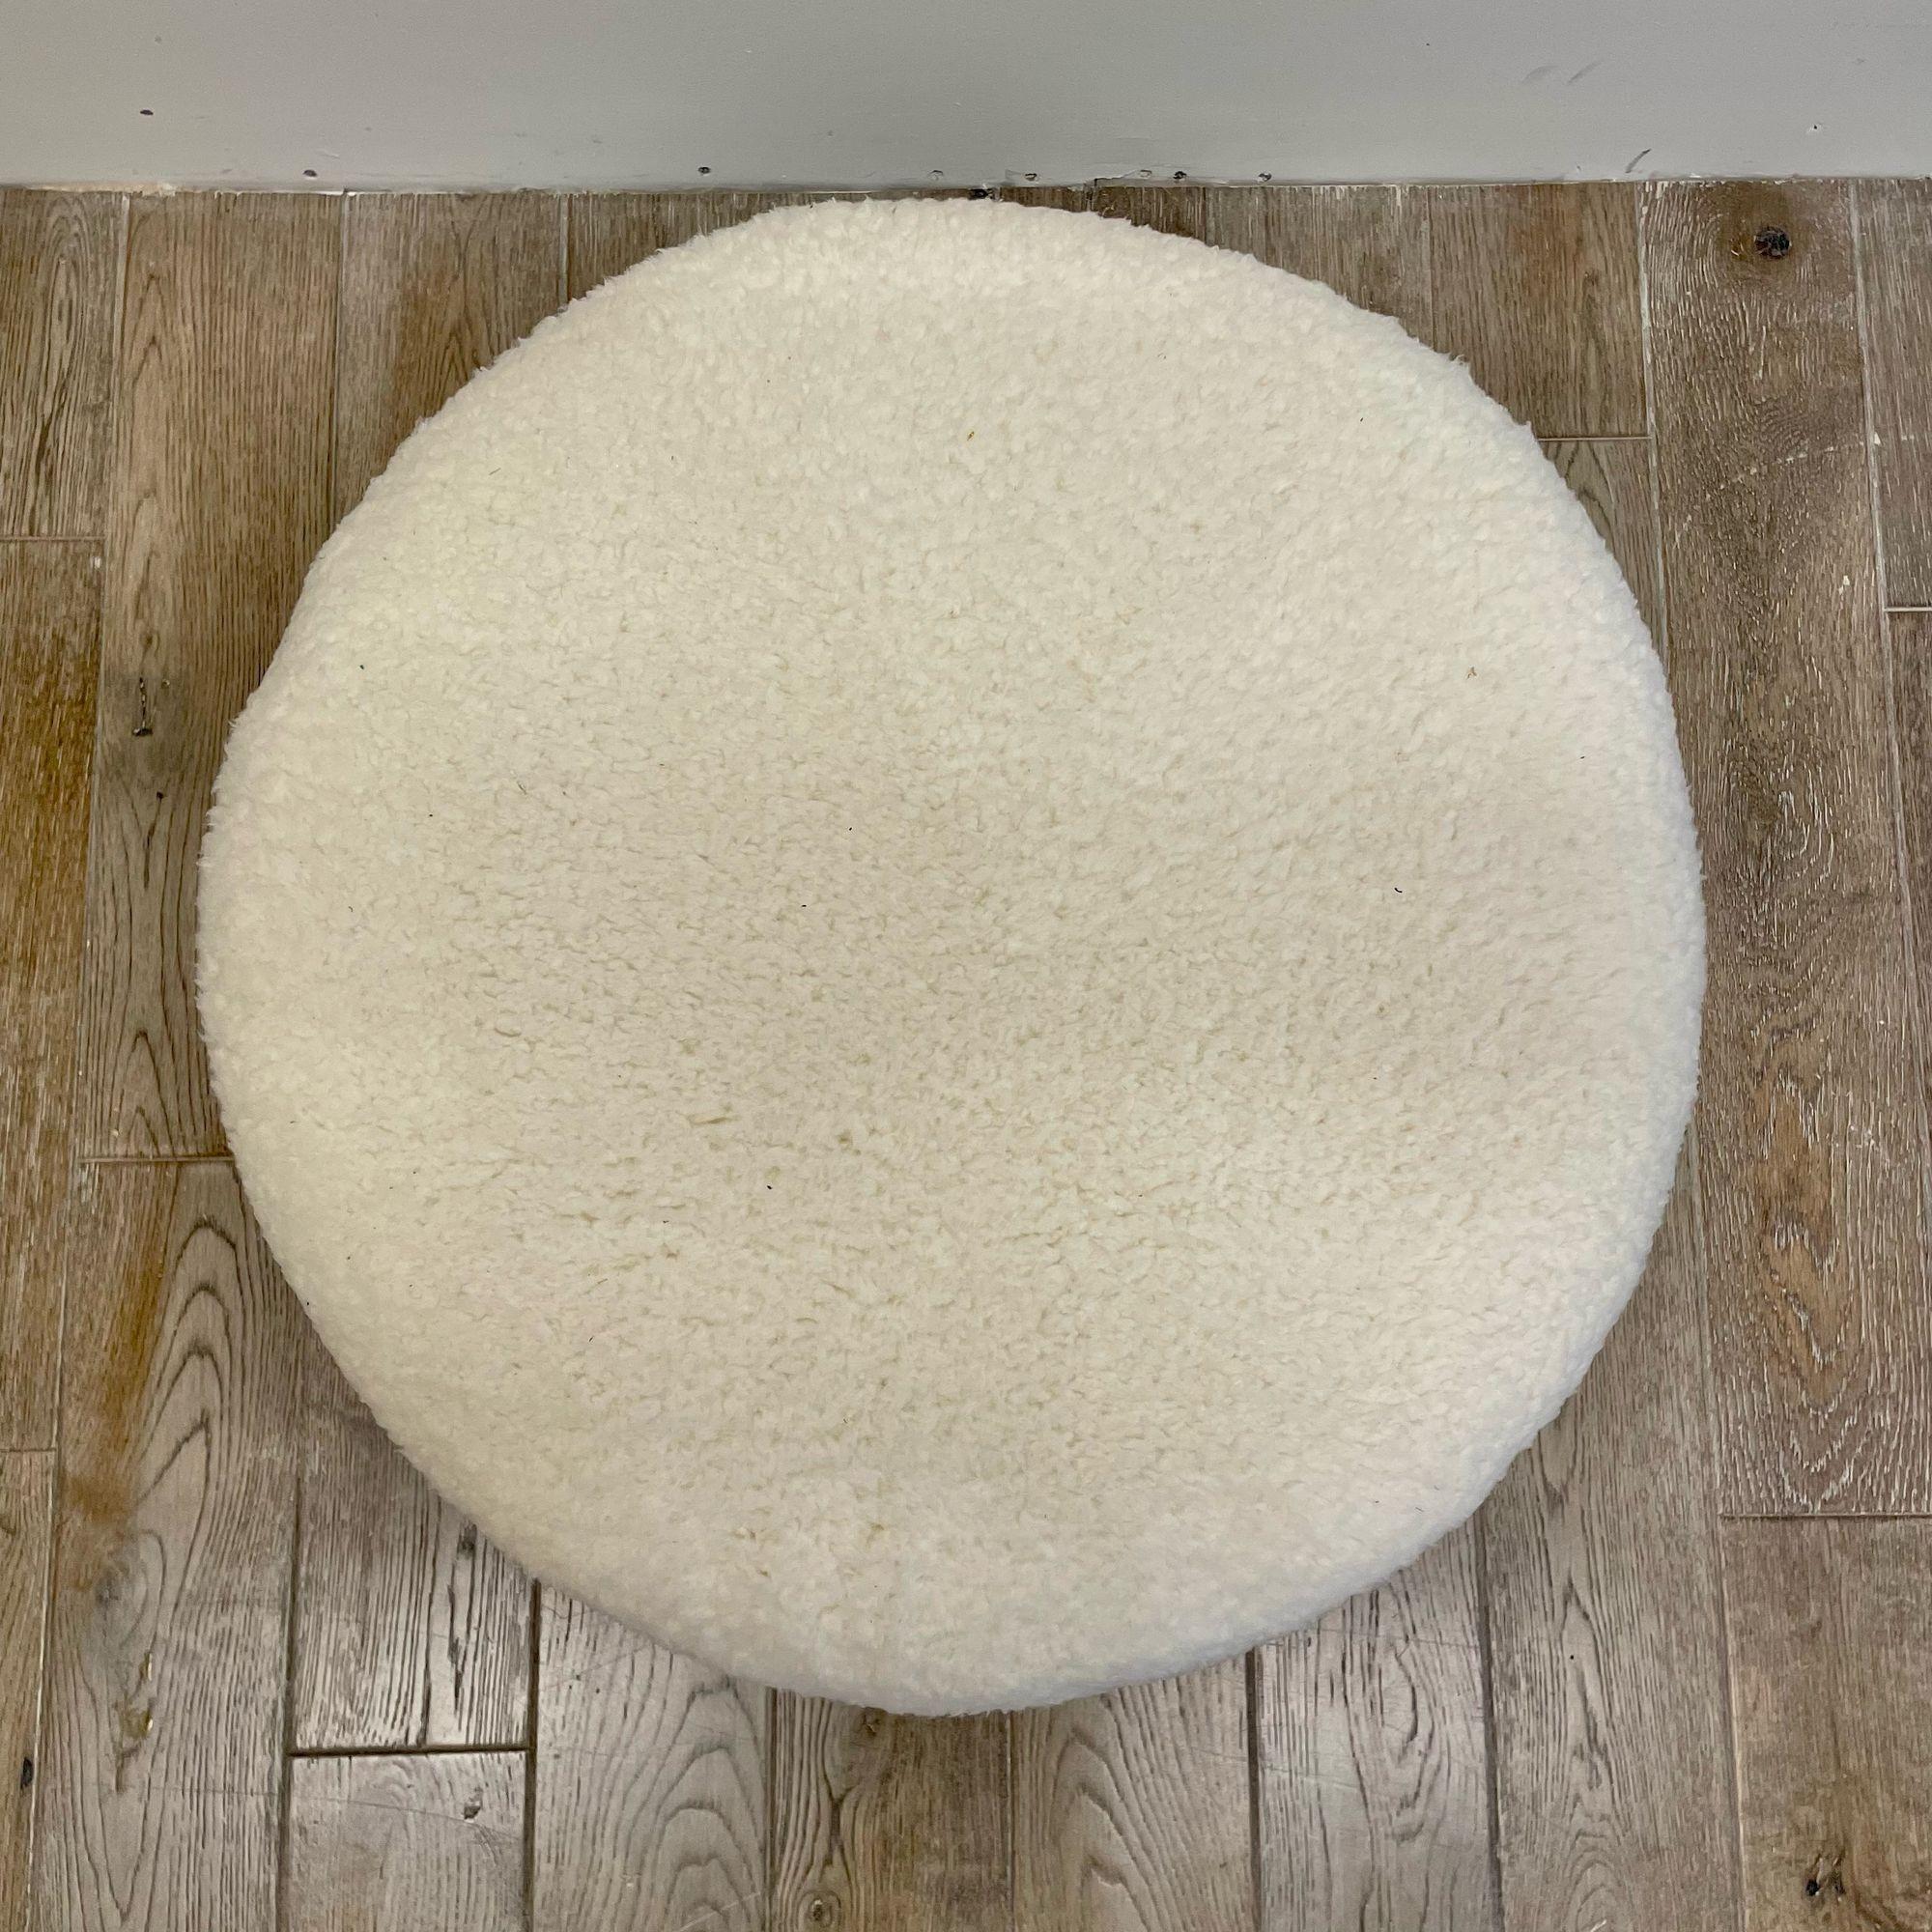 Contemporary Swedish Modern Style Faux Sheepskin Footstool / Ottoman, Cream In Good Condition For Sale In Stamford, CT